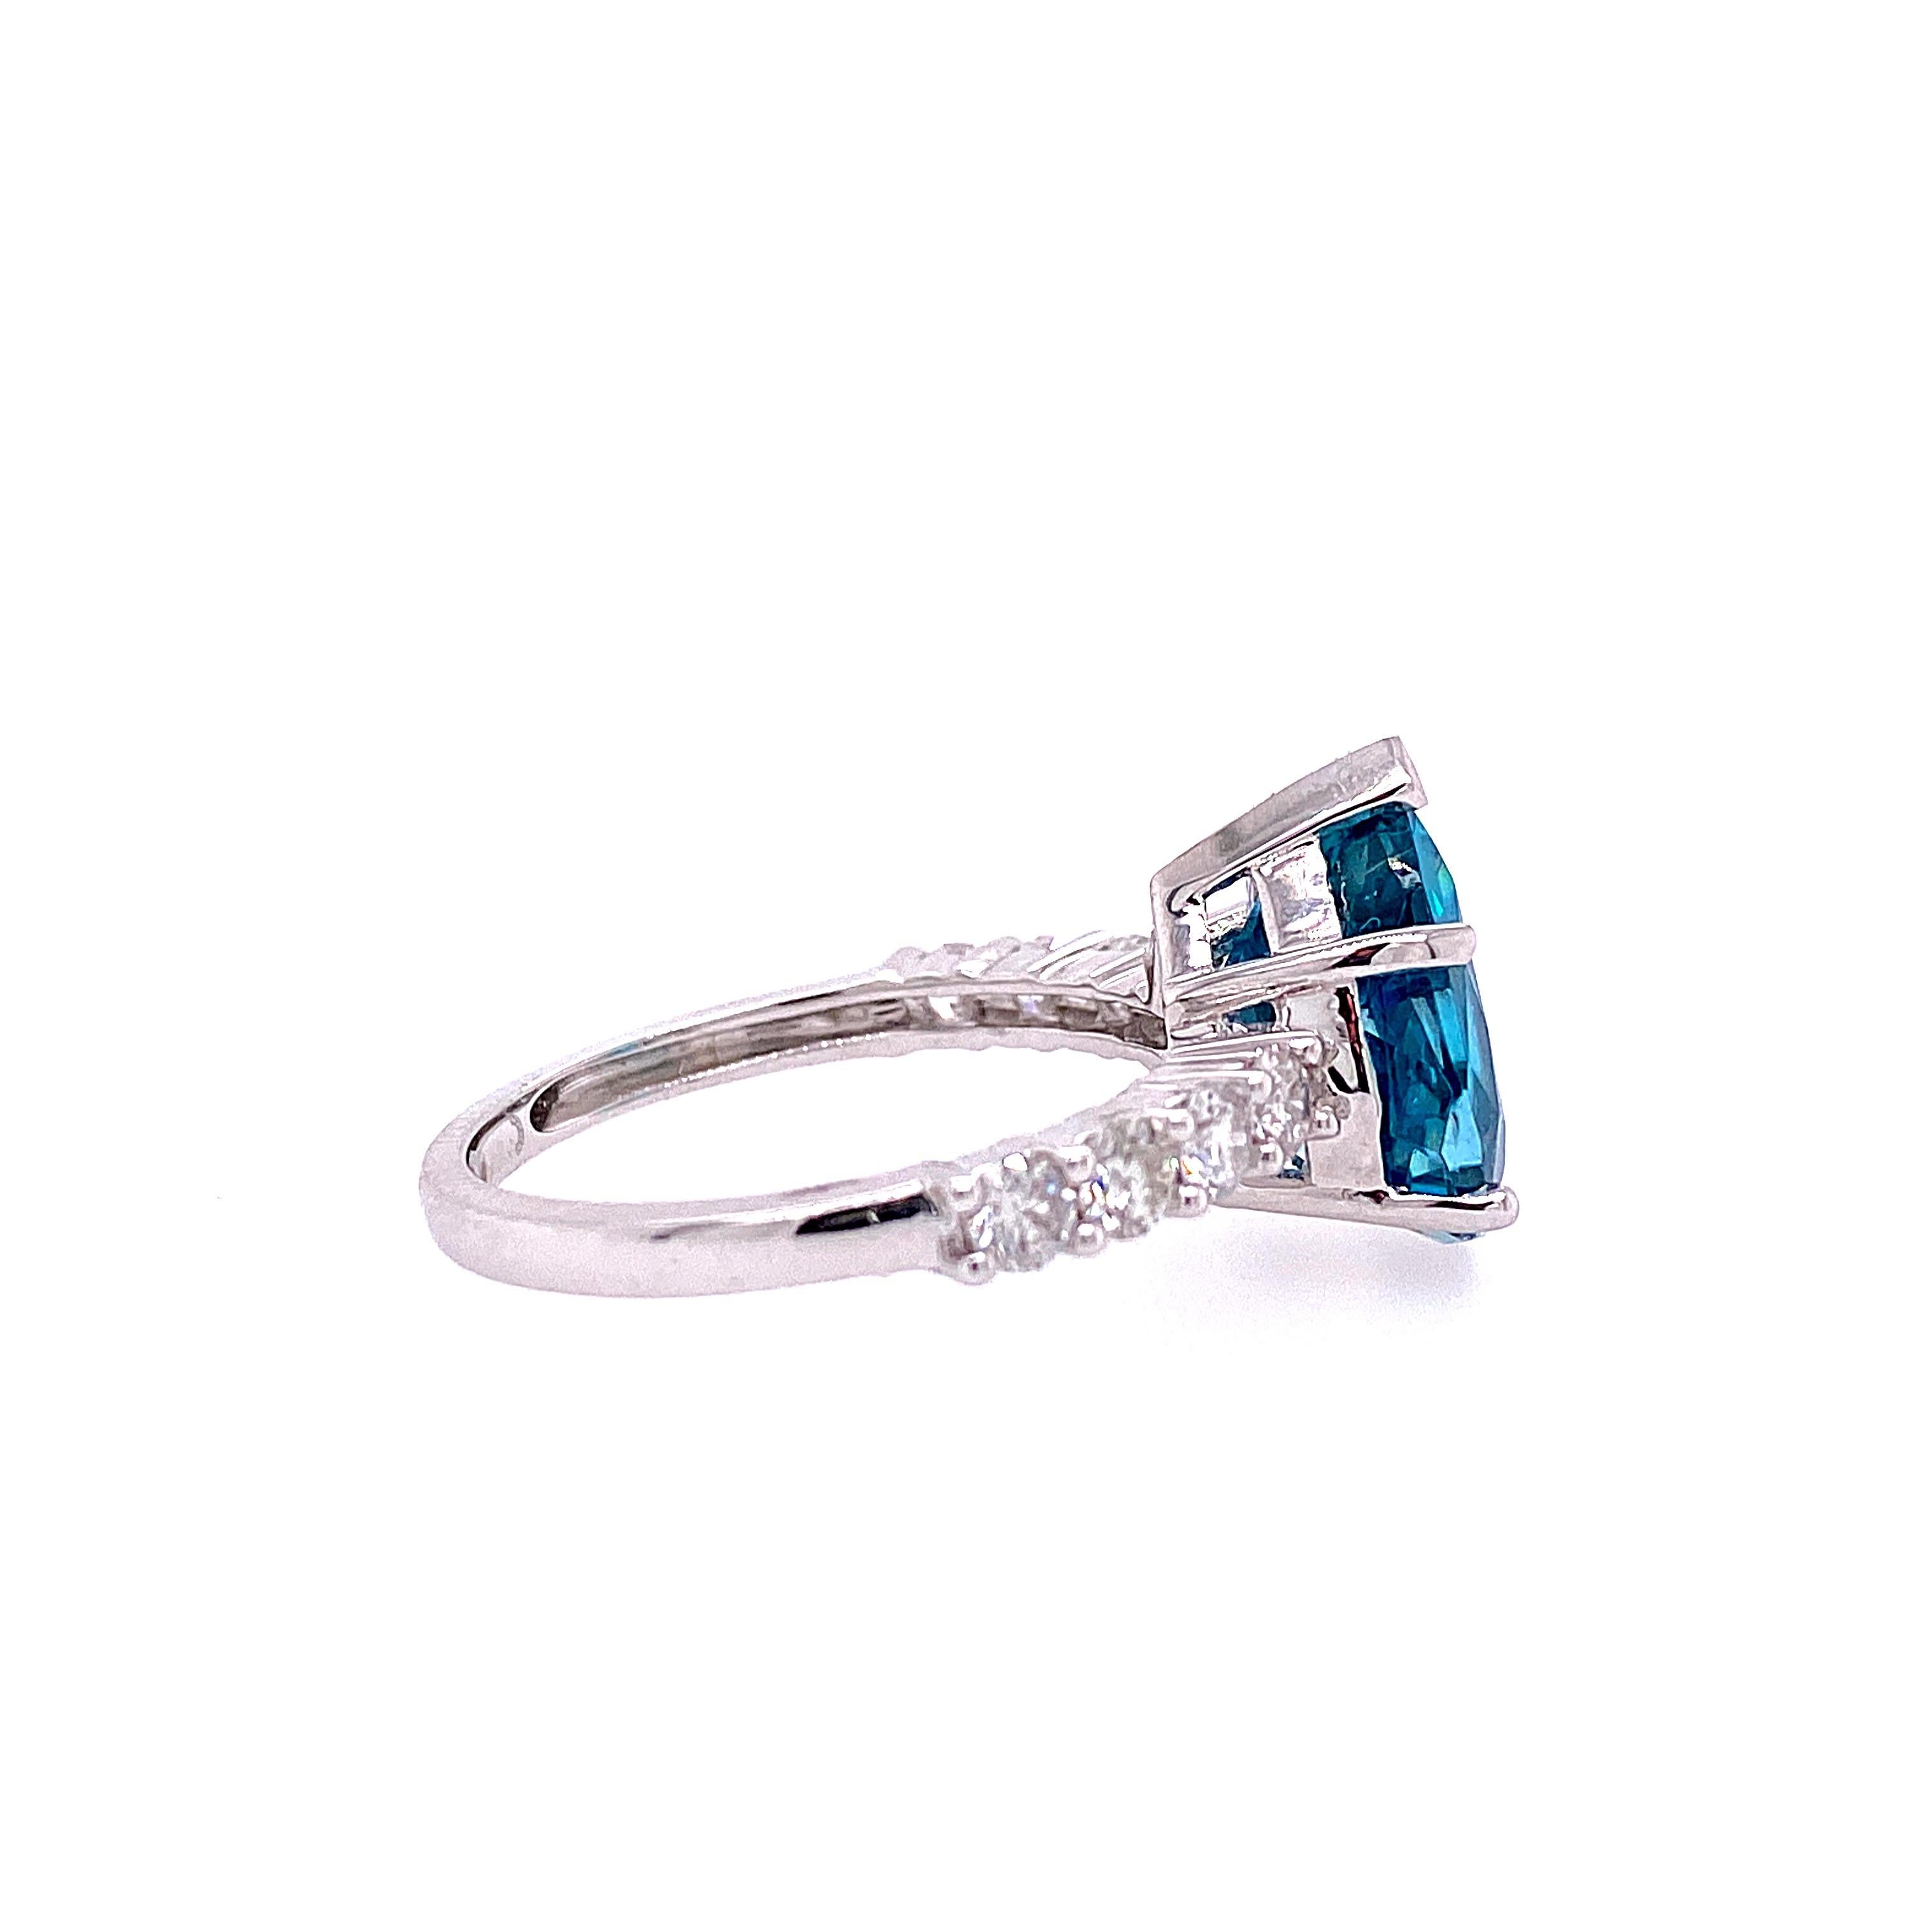 5.52 Carat Pear Blue Zircon and Diamond Cocktail Ring In New Condition For Sale In Great Neck, NY